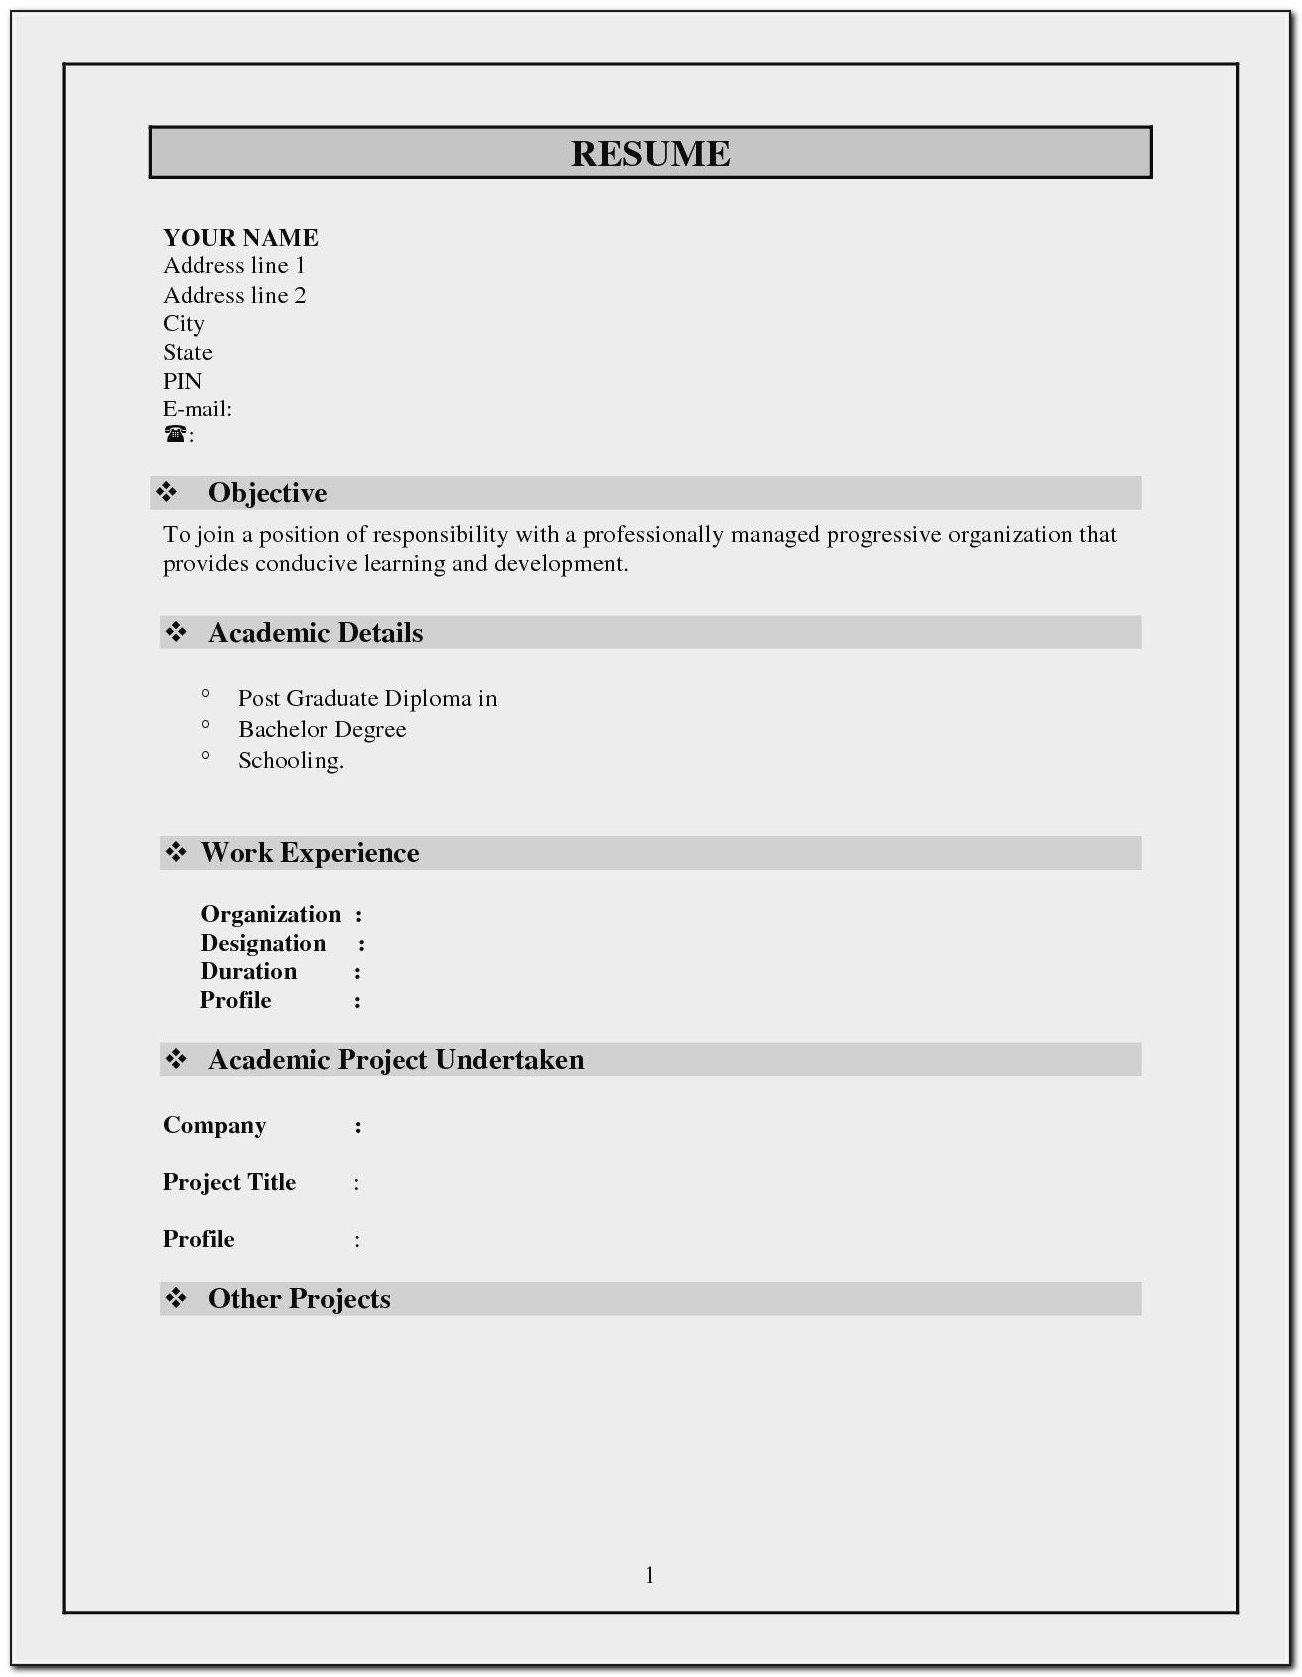 Blank Resume Format Download In Ms Word For Fresher